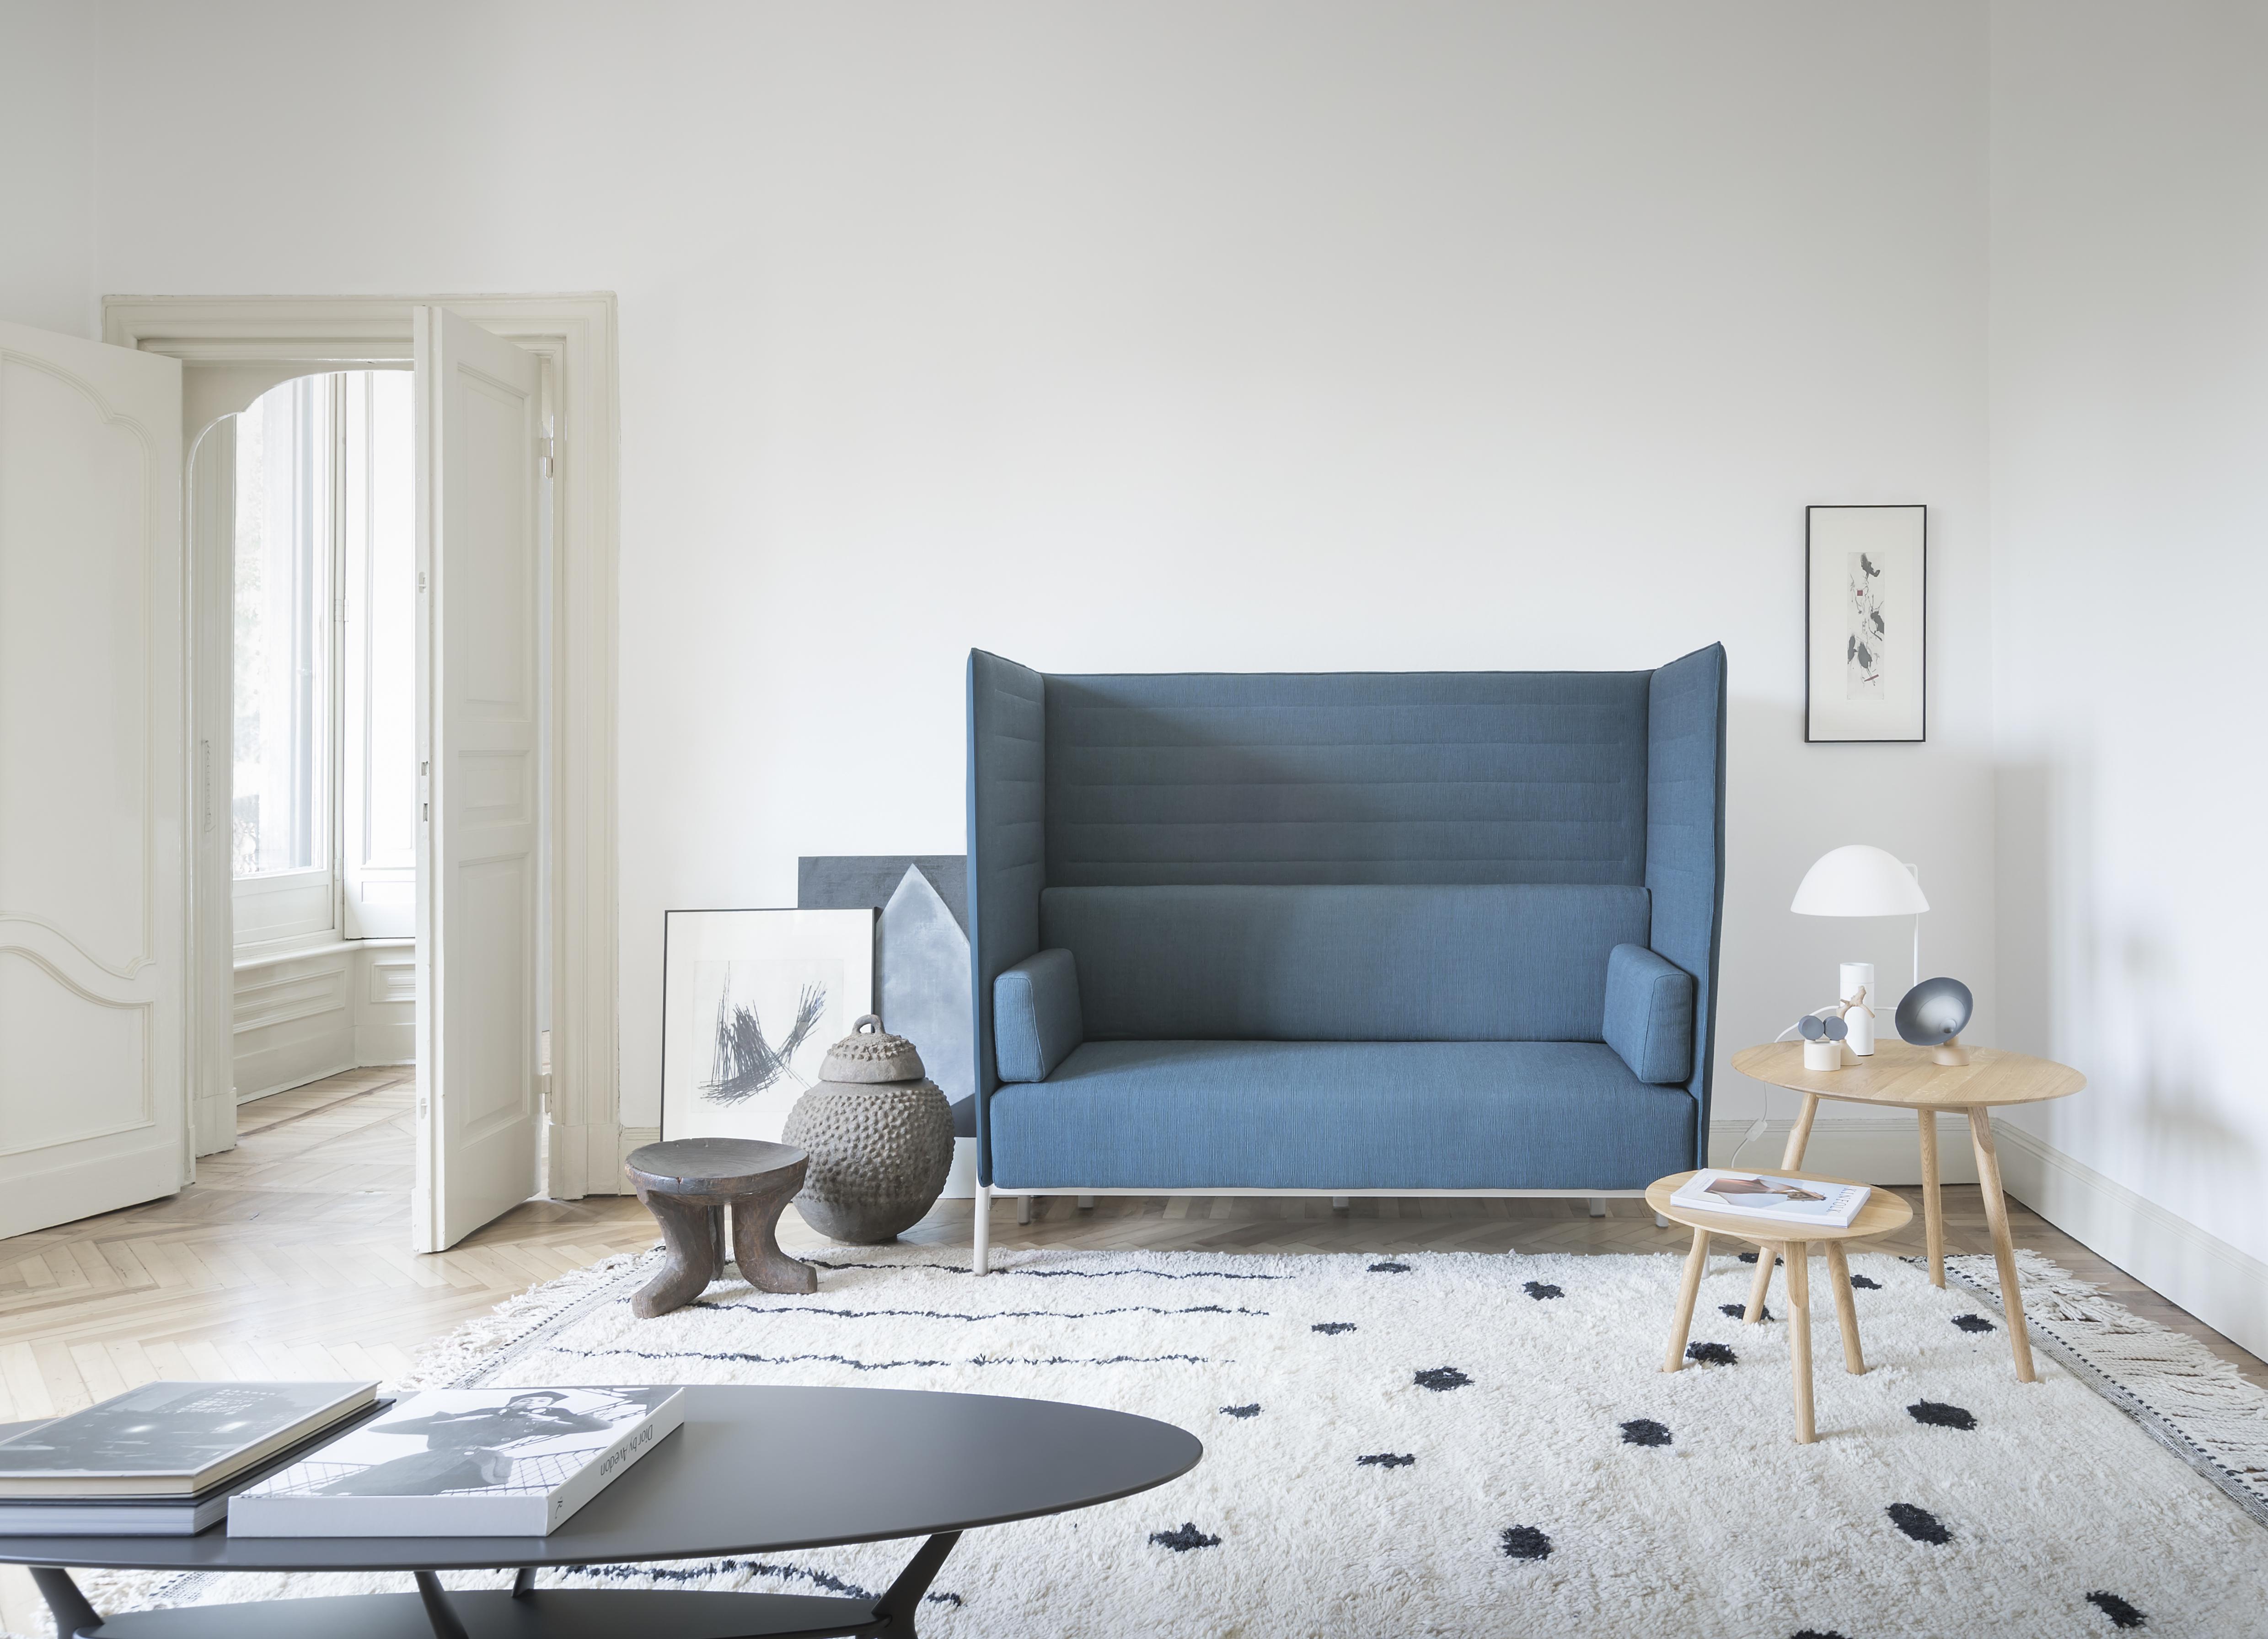 Alias 863 Eleven High Back 2 Seater Sofa in Blue Seat and White Lacquered Aluminum Frame by PearsonLloyd

Two-seater sofa with die-cast aluminium legs and steel frame. Seat cushion, back and arms in polyurethane covered with fabric. Panels covered